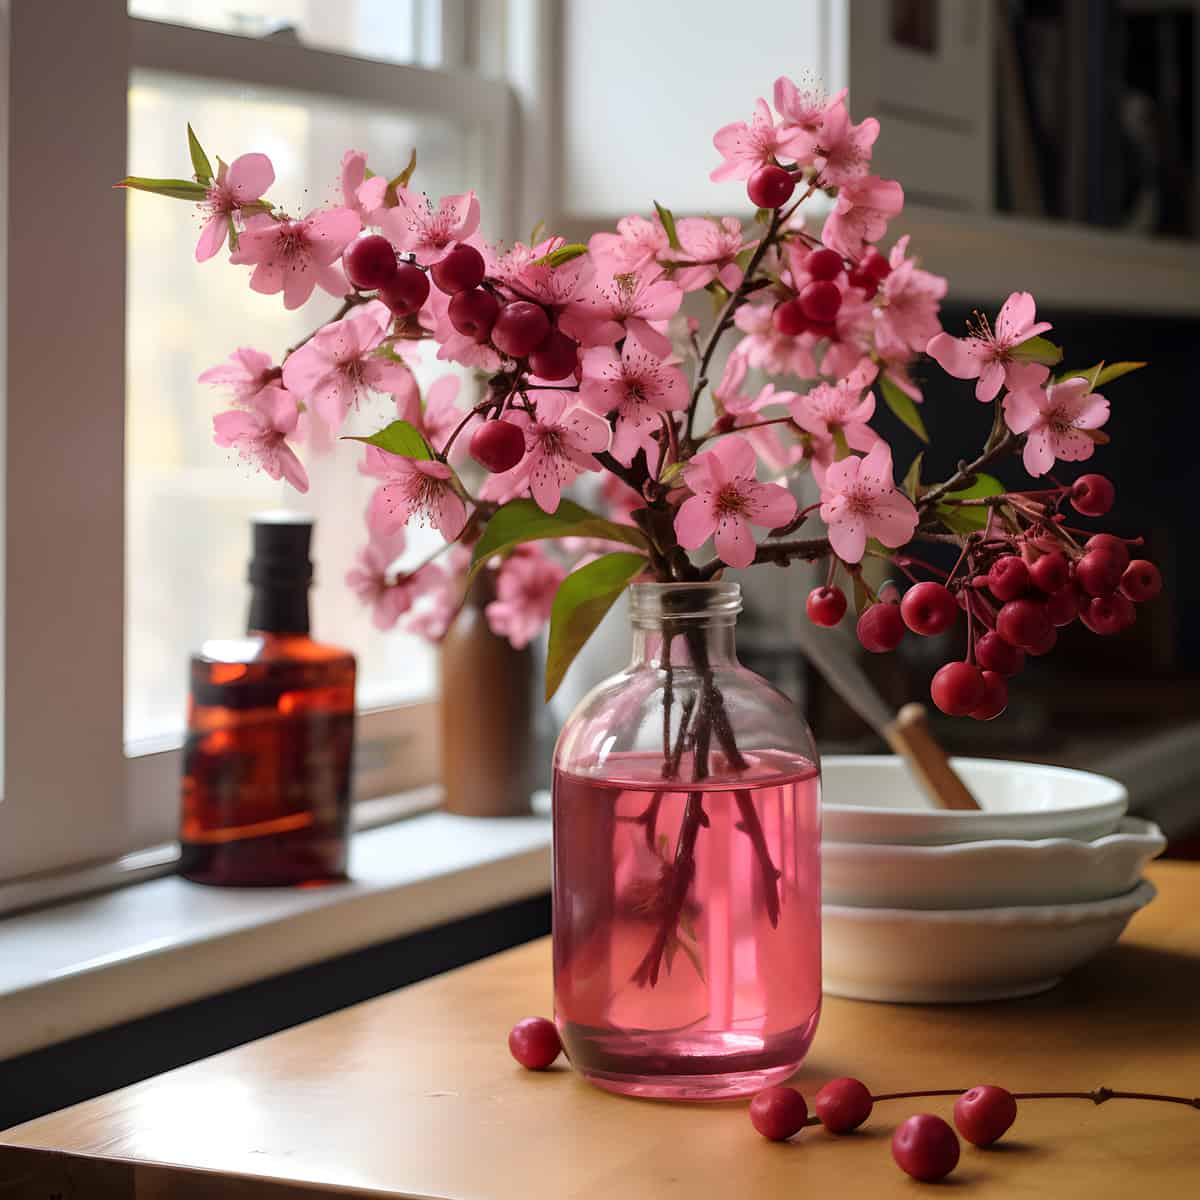 Eastern Crabapple on a kitchen counter